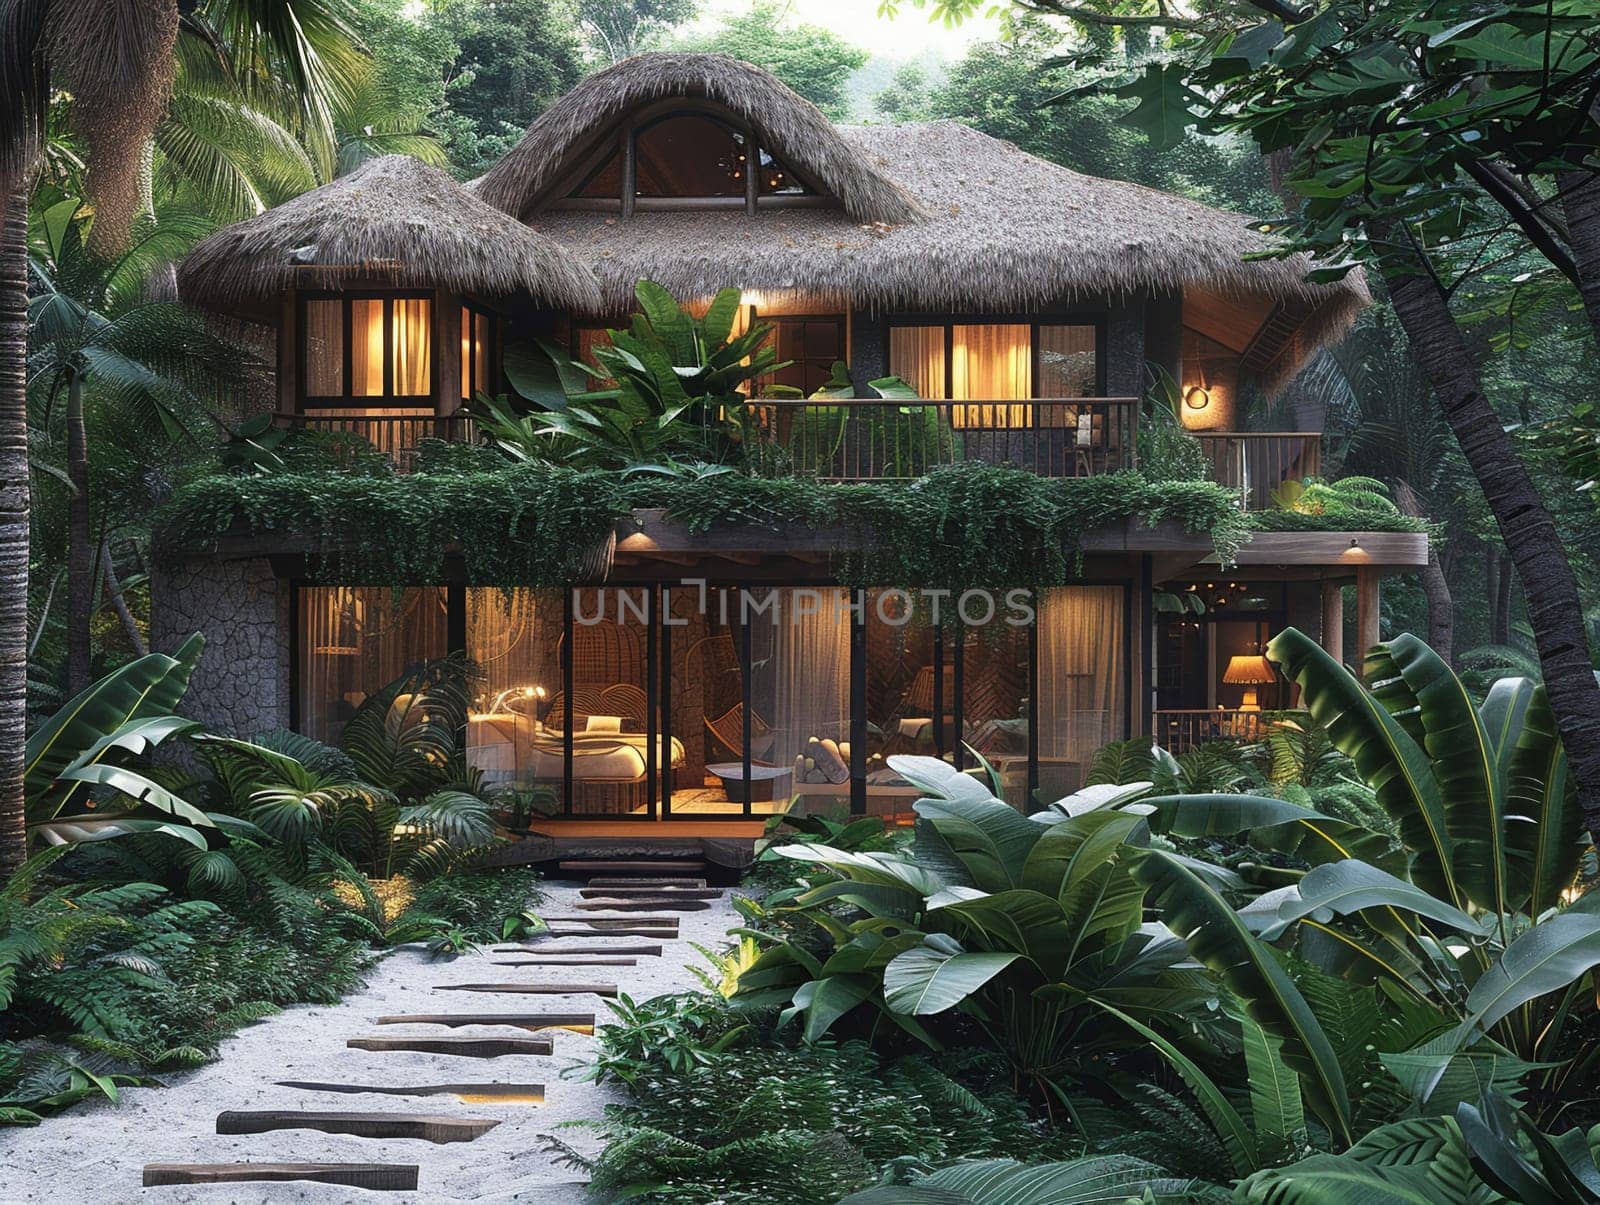 Luxurious Tropical Hideaway Nestled in Lush Foliage, a bungalow paradise.